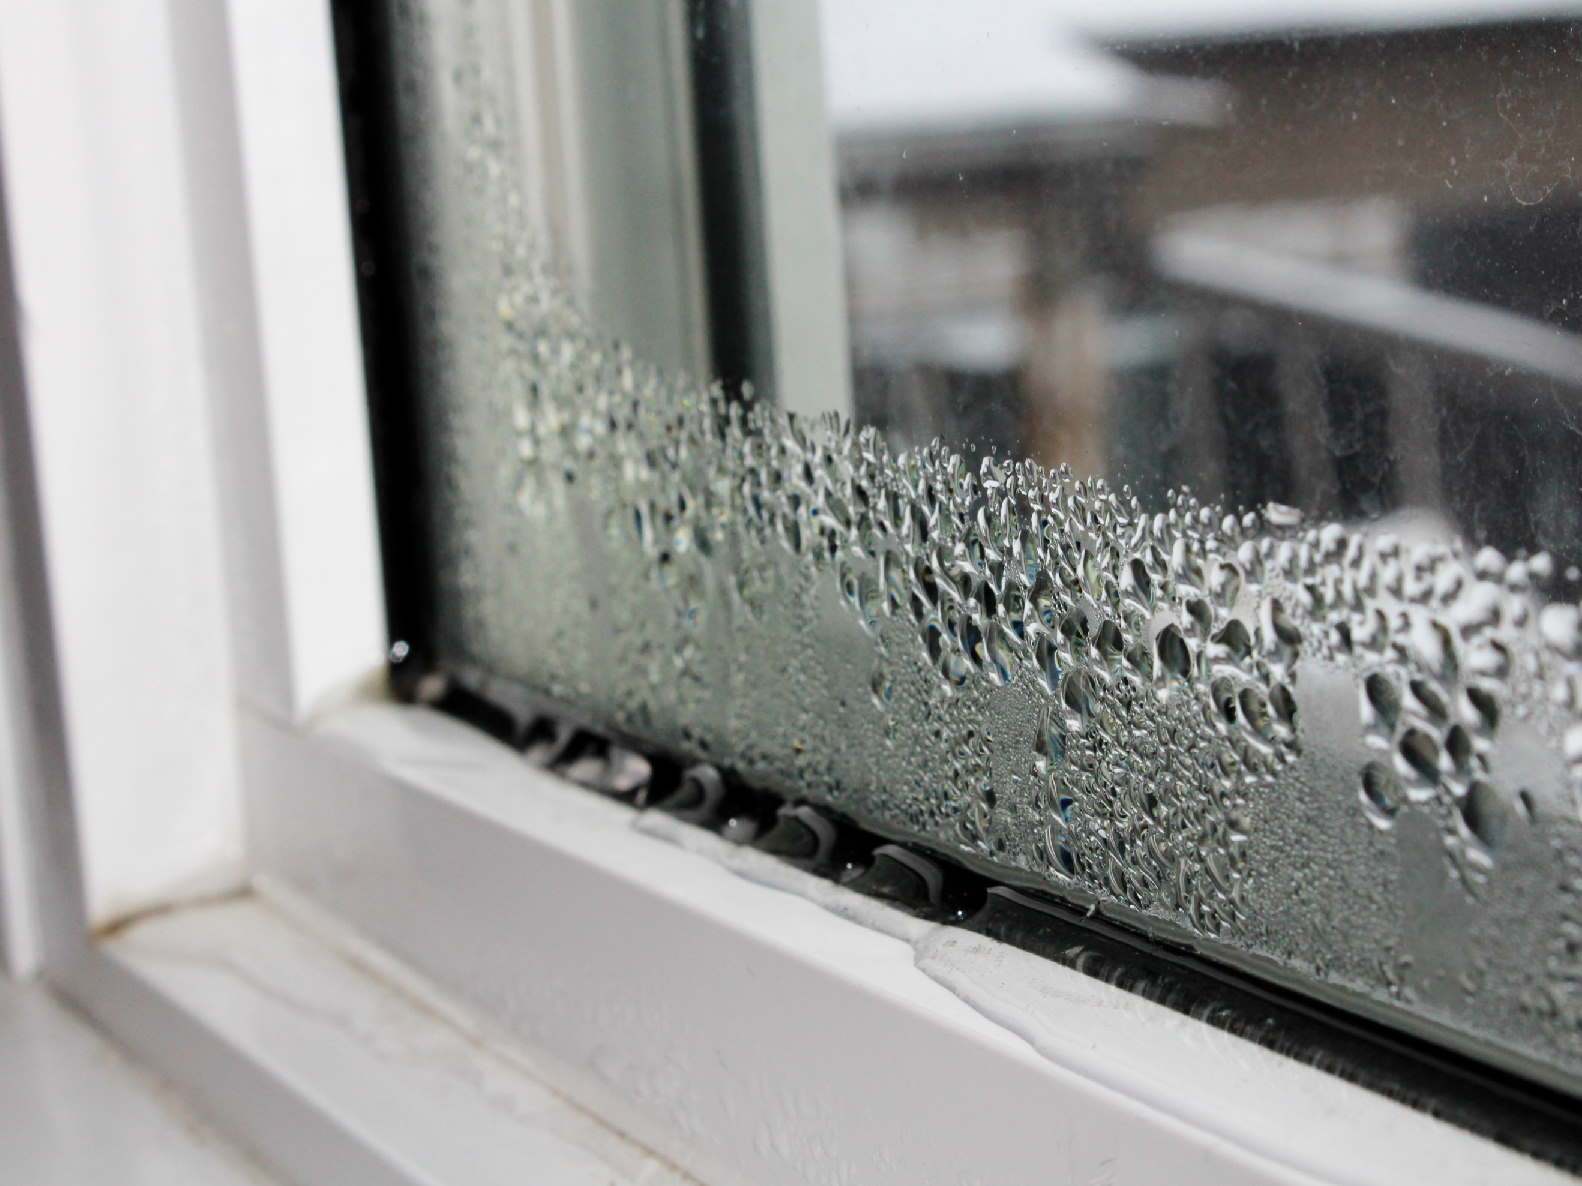 How to get rid of condensation